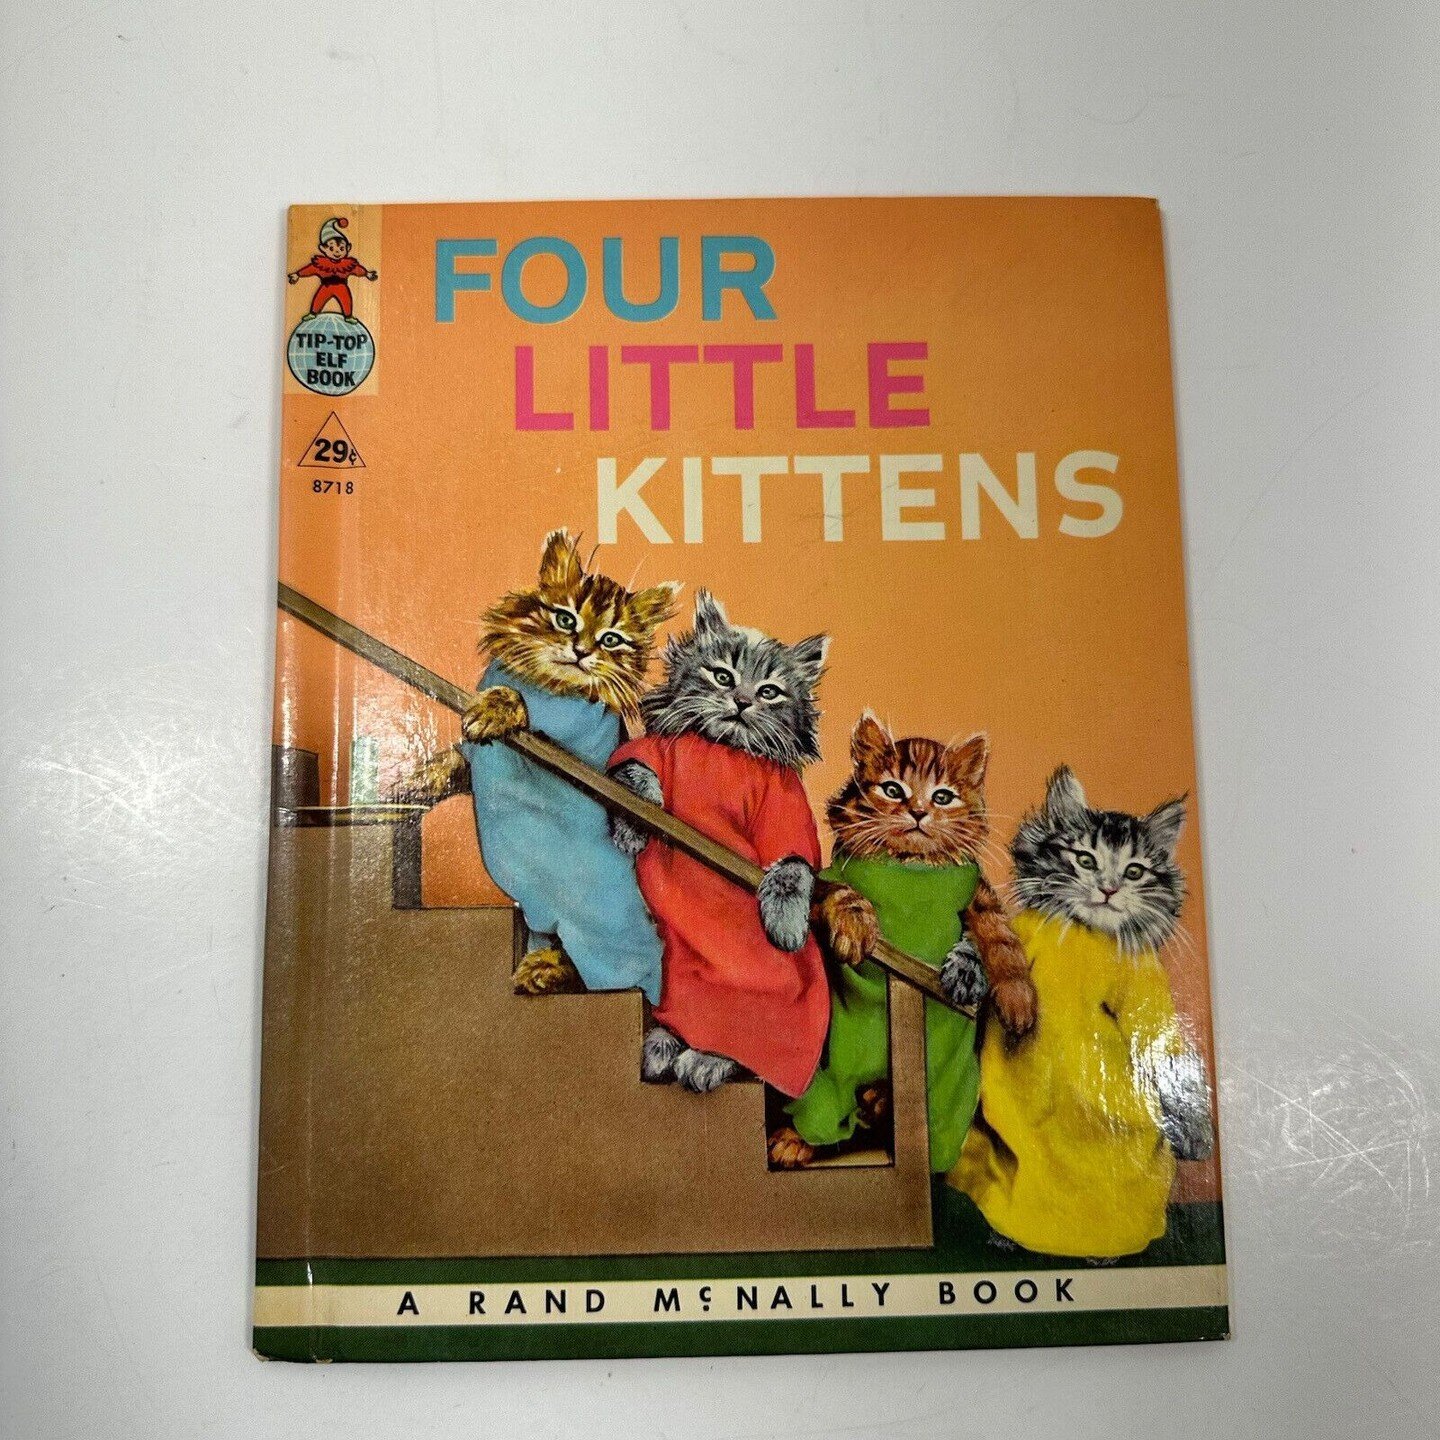 Vintage FOUR LITTLE KITTENS 1957 Book 8718 A Rand McNally Tip Top Elf Book
$19.99

Good condition MCM kids book. Some writing on cover and first couple pages. Overall very good.

#ebayseller 
#mercariseller 
#childrensbooks 
#vintagekidsbooks 
#vinta